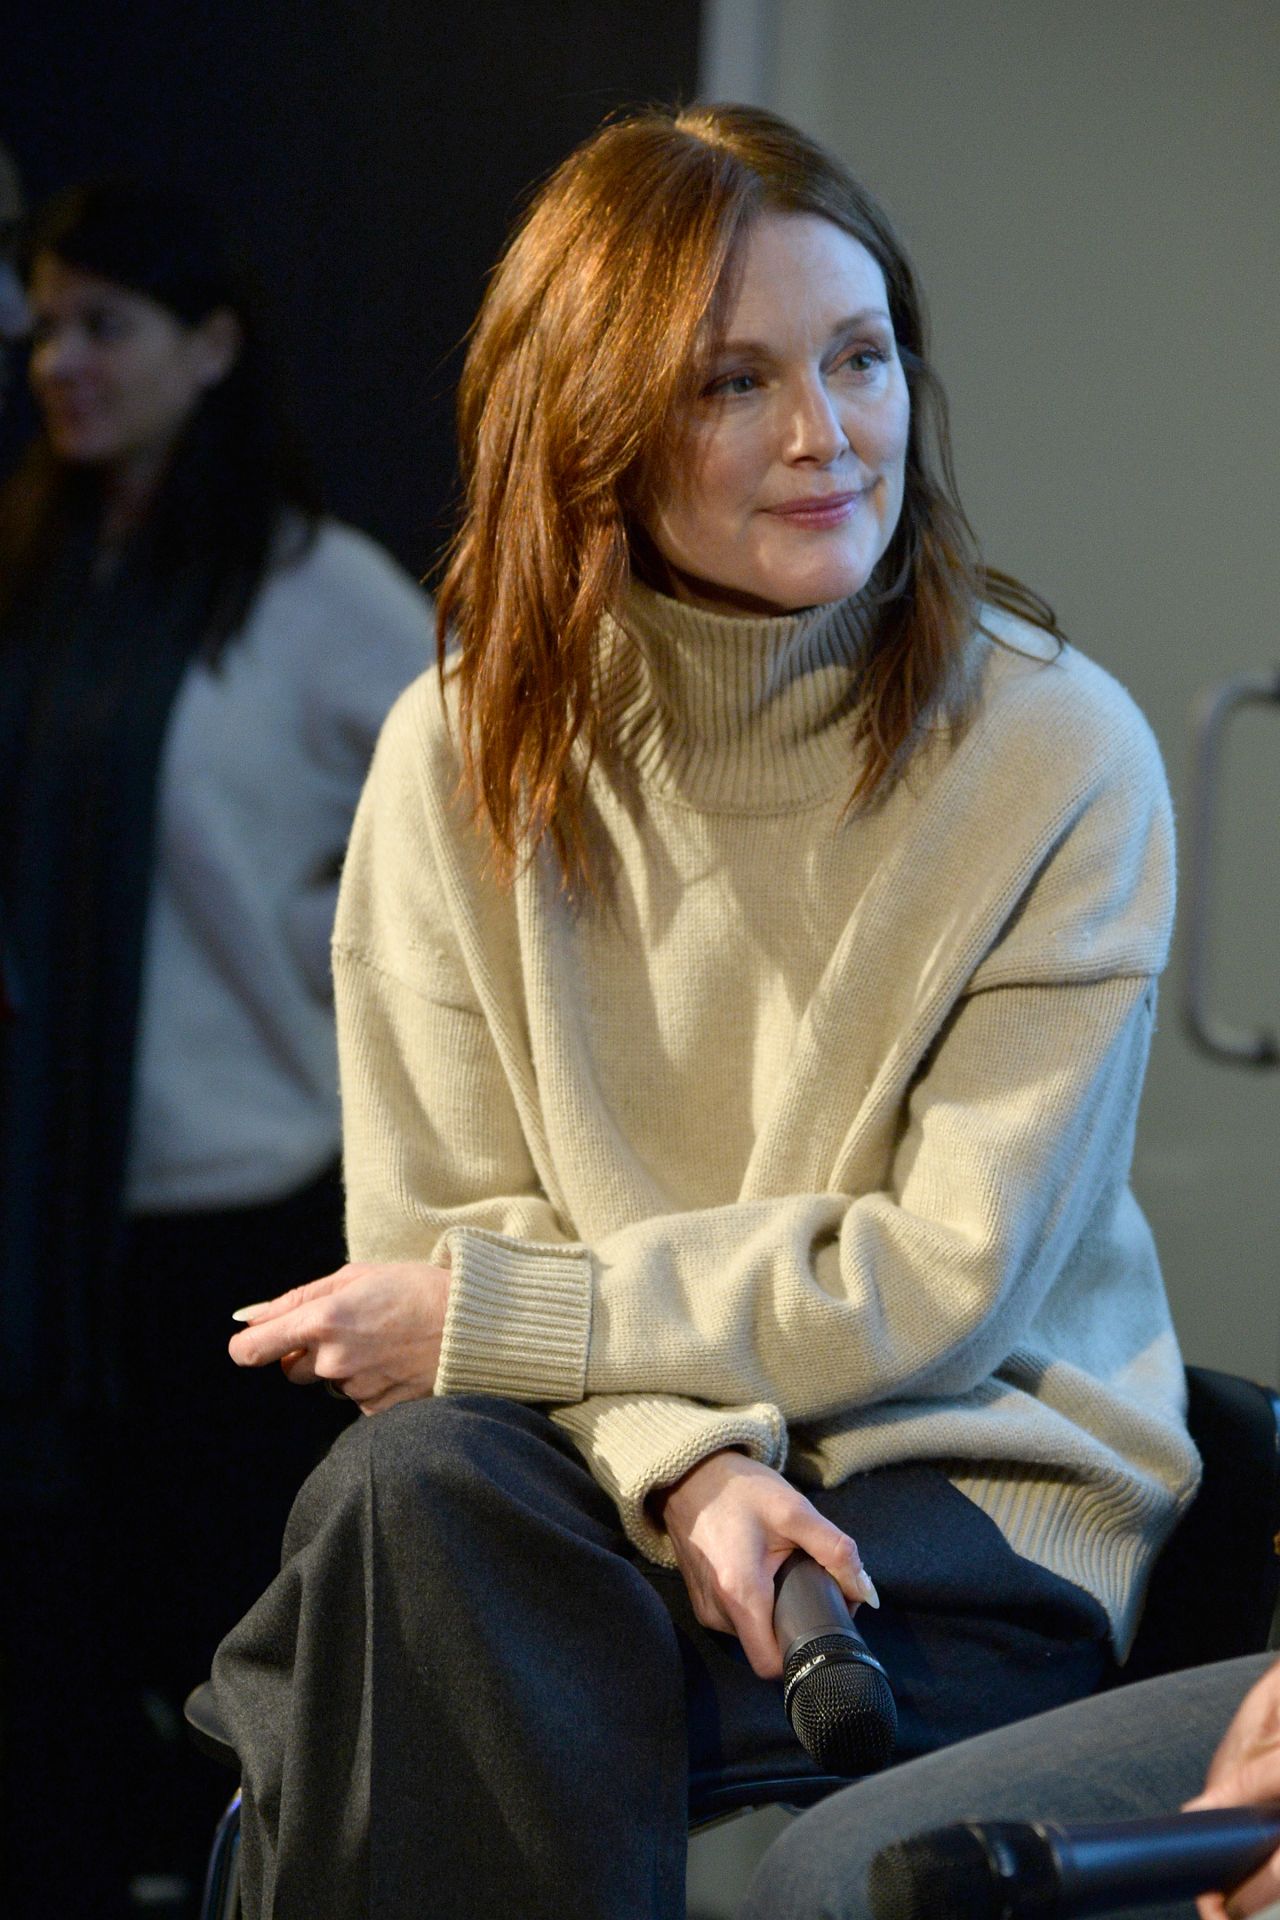 https://celebmafia.com/wp-content/uploads/2019/01/julianne-moore-9th-annual-peace-week-town-hall-in-ny-5.jpg